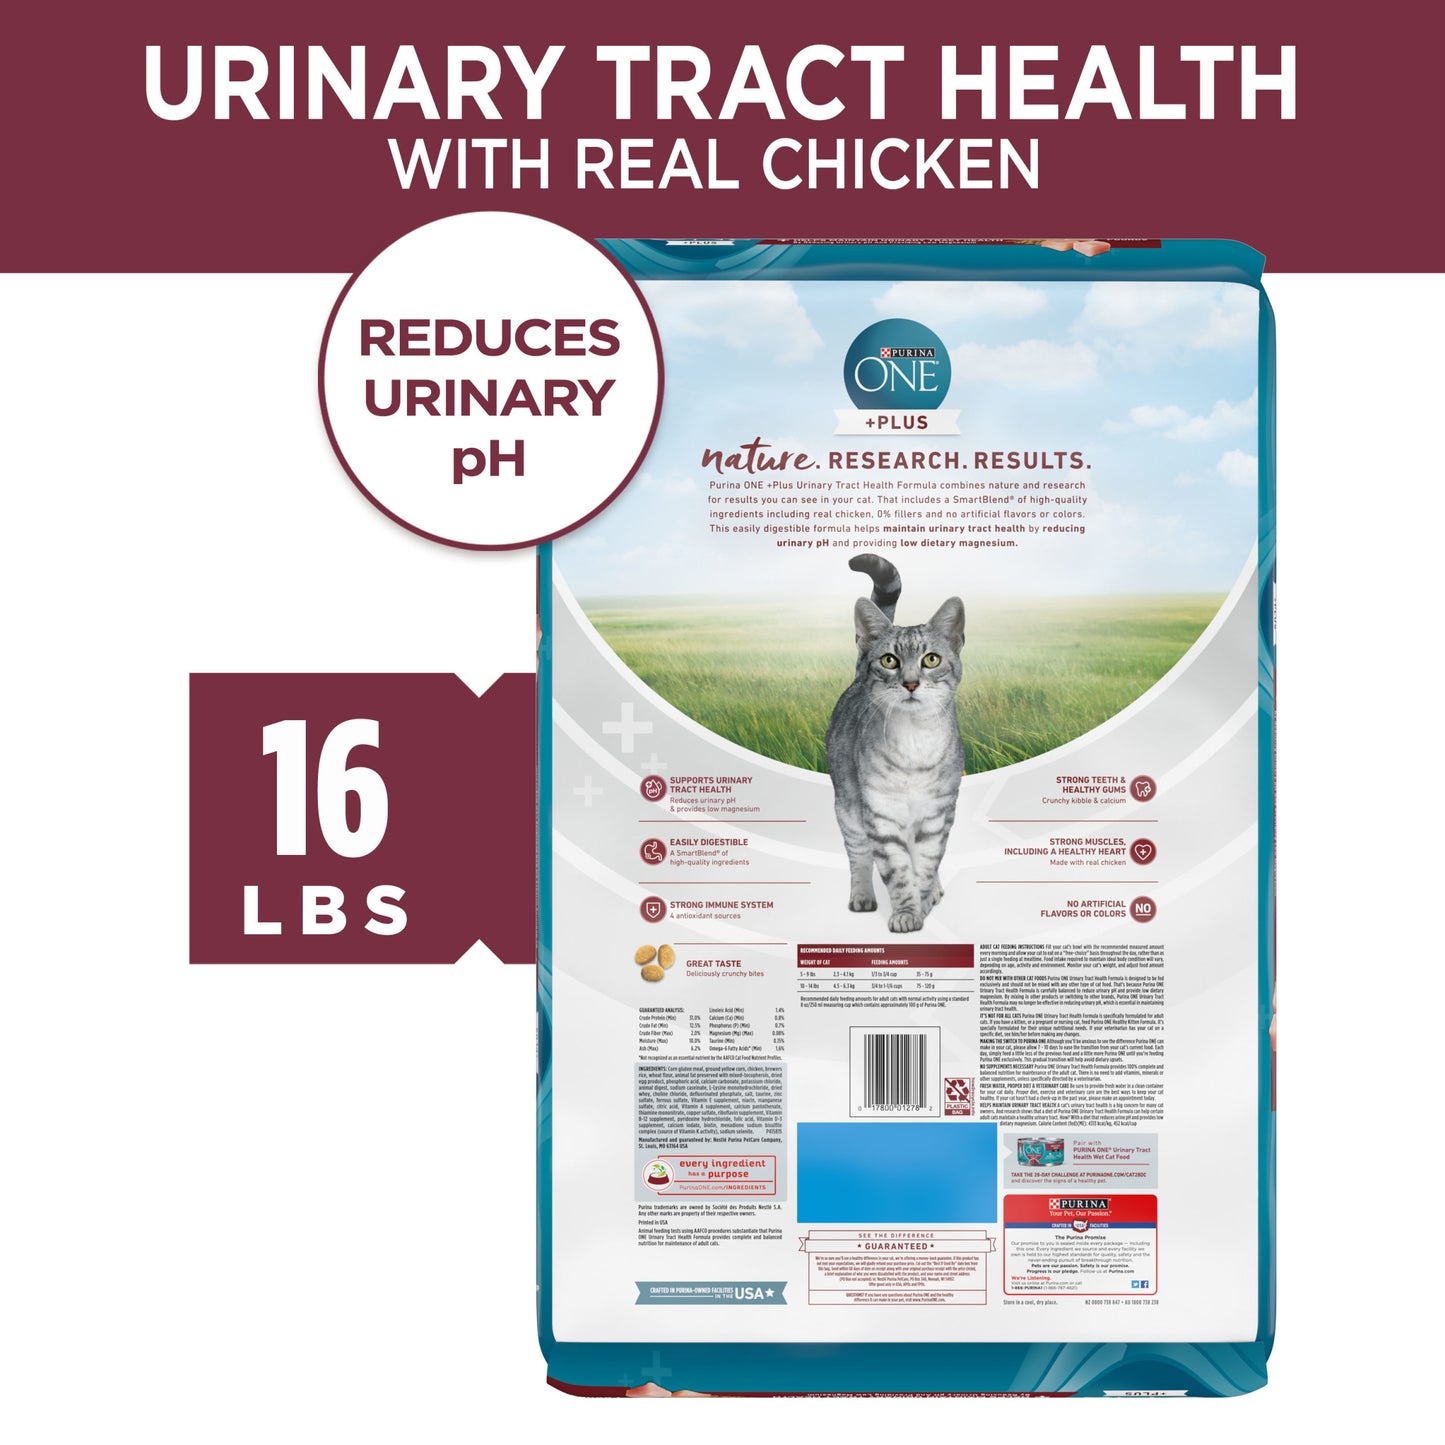 Purina ONE High Protein Dry Cat Food, +Plus Urinary Tract Health Formula, 7 lb. Bag